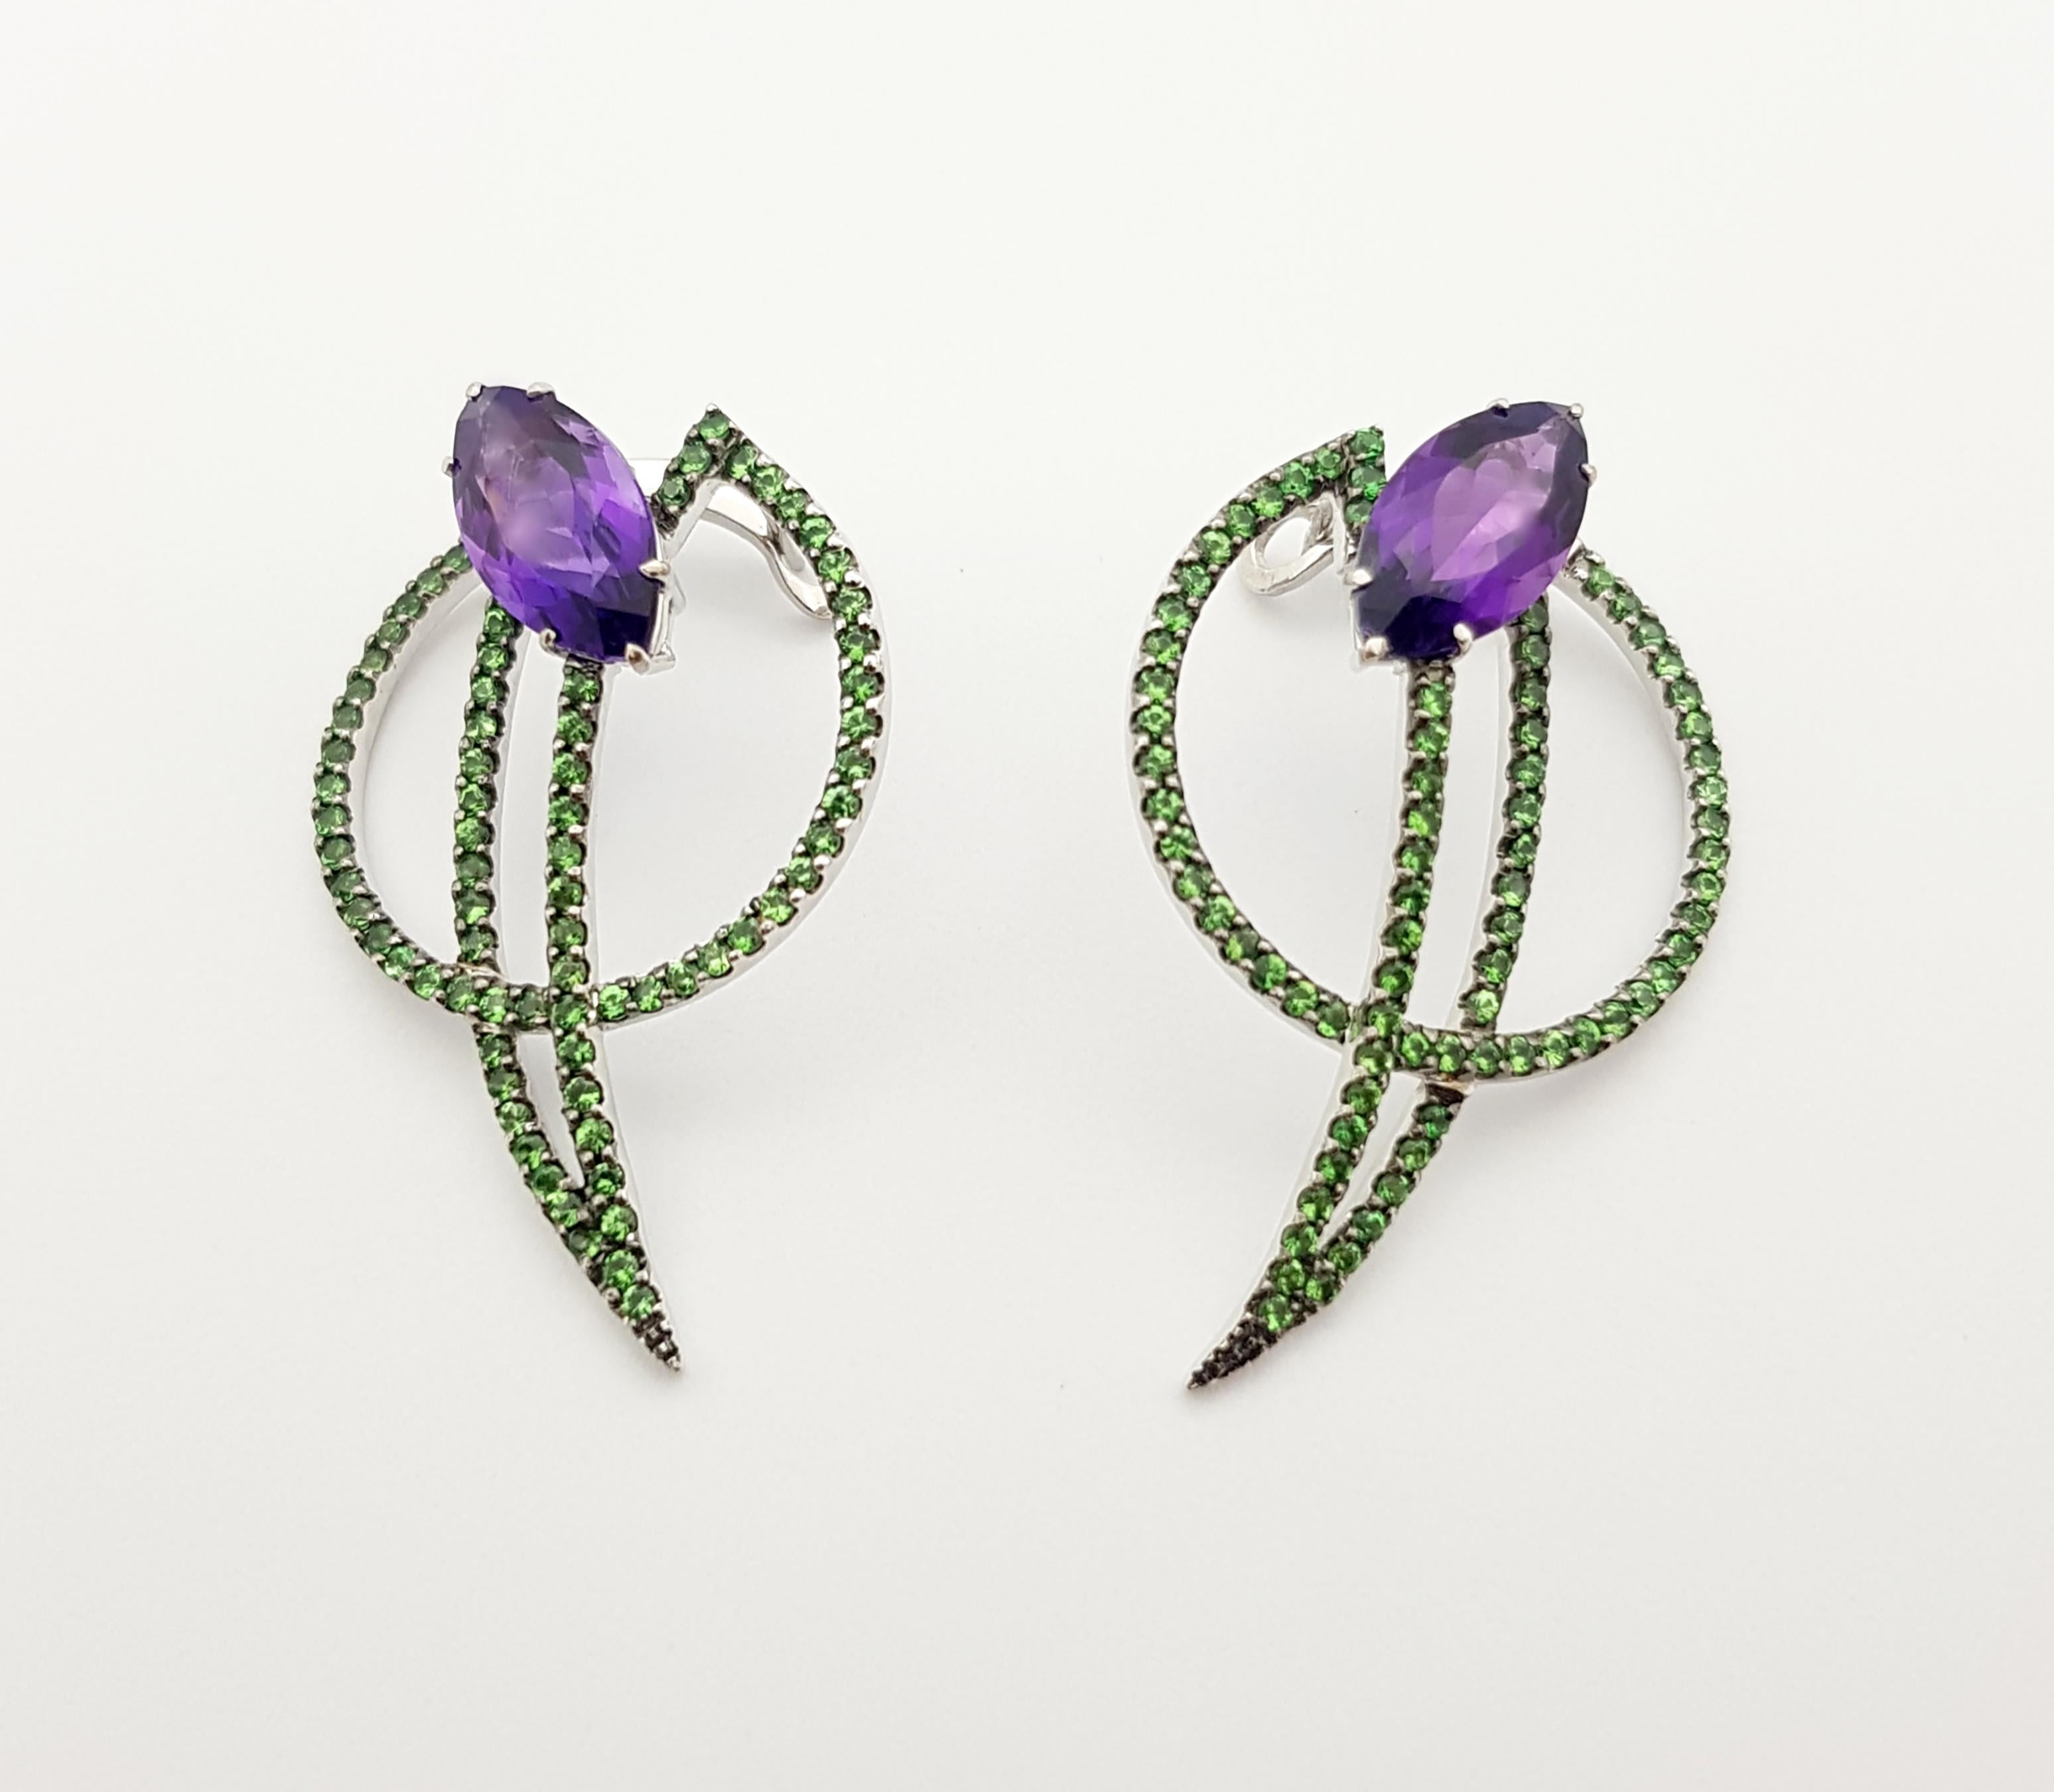 Contemporary Amethyst with Tsavorite Earrings Set in 18K White Gold by Kavant & Sharart For Sale